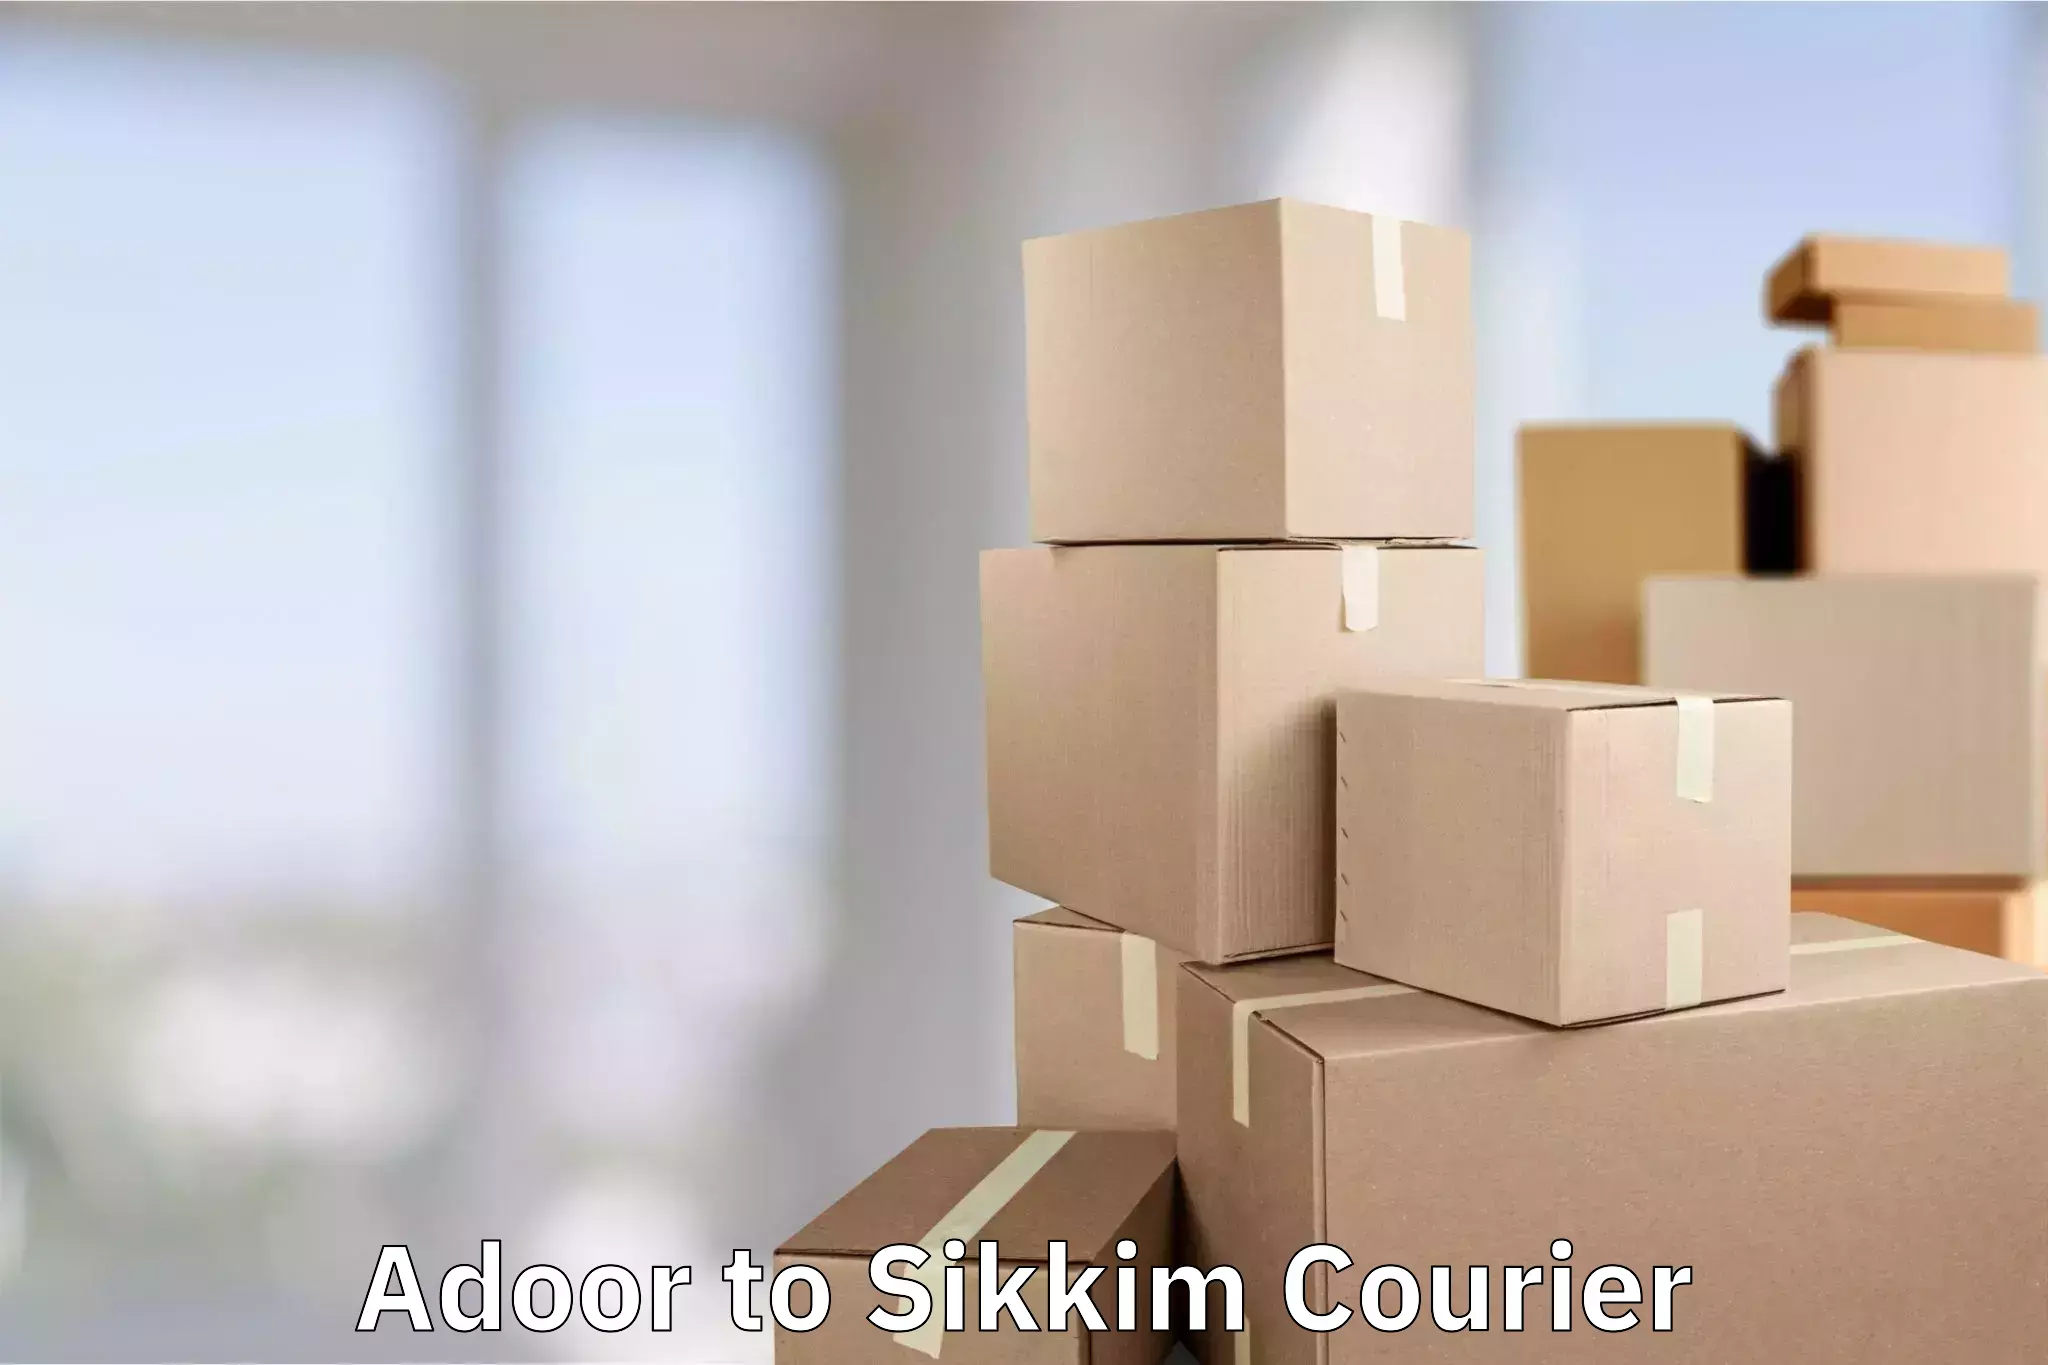 Hassle-free luggage shipping Adoor to Sikkim